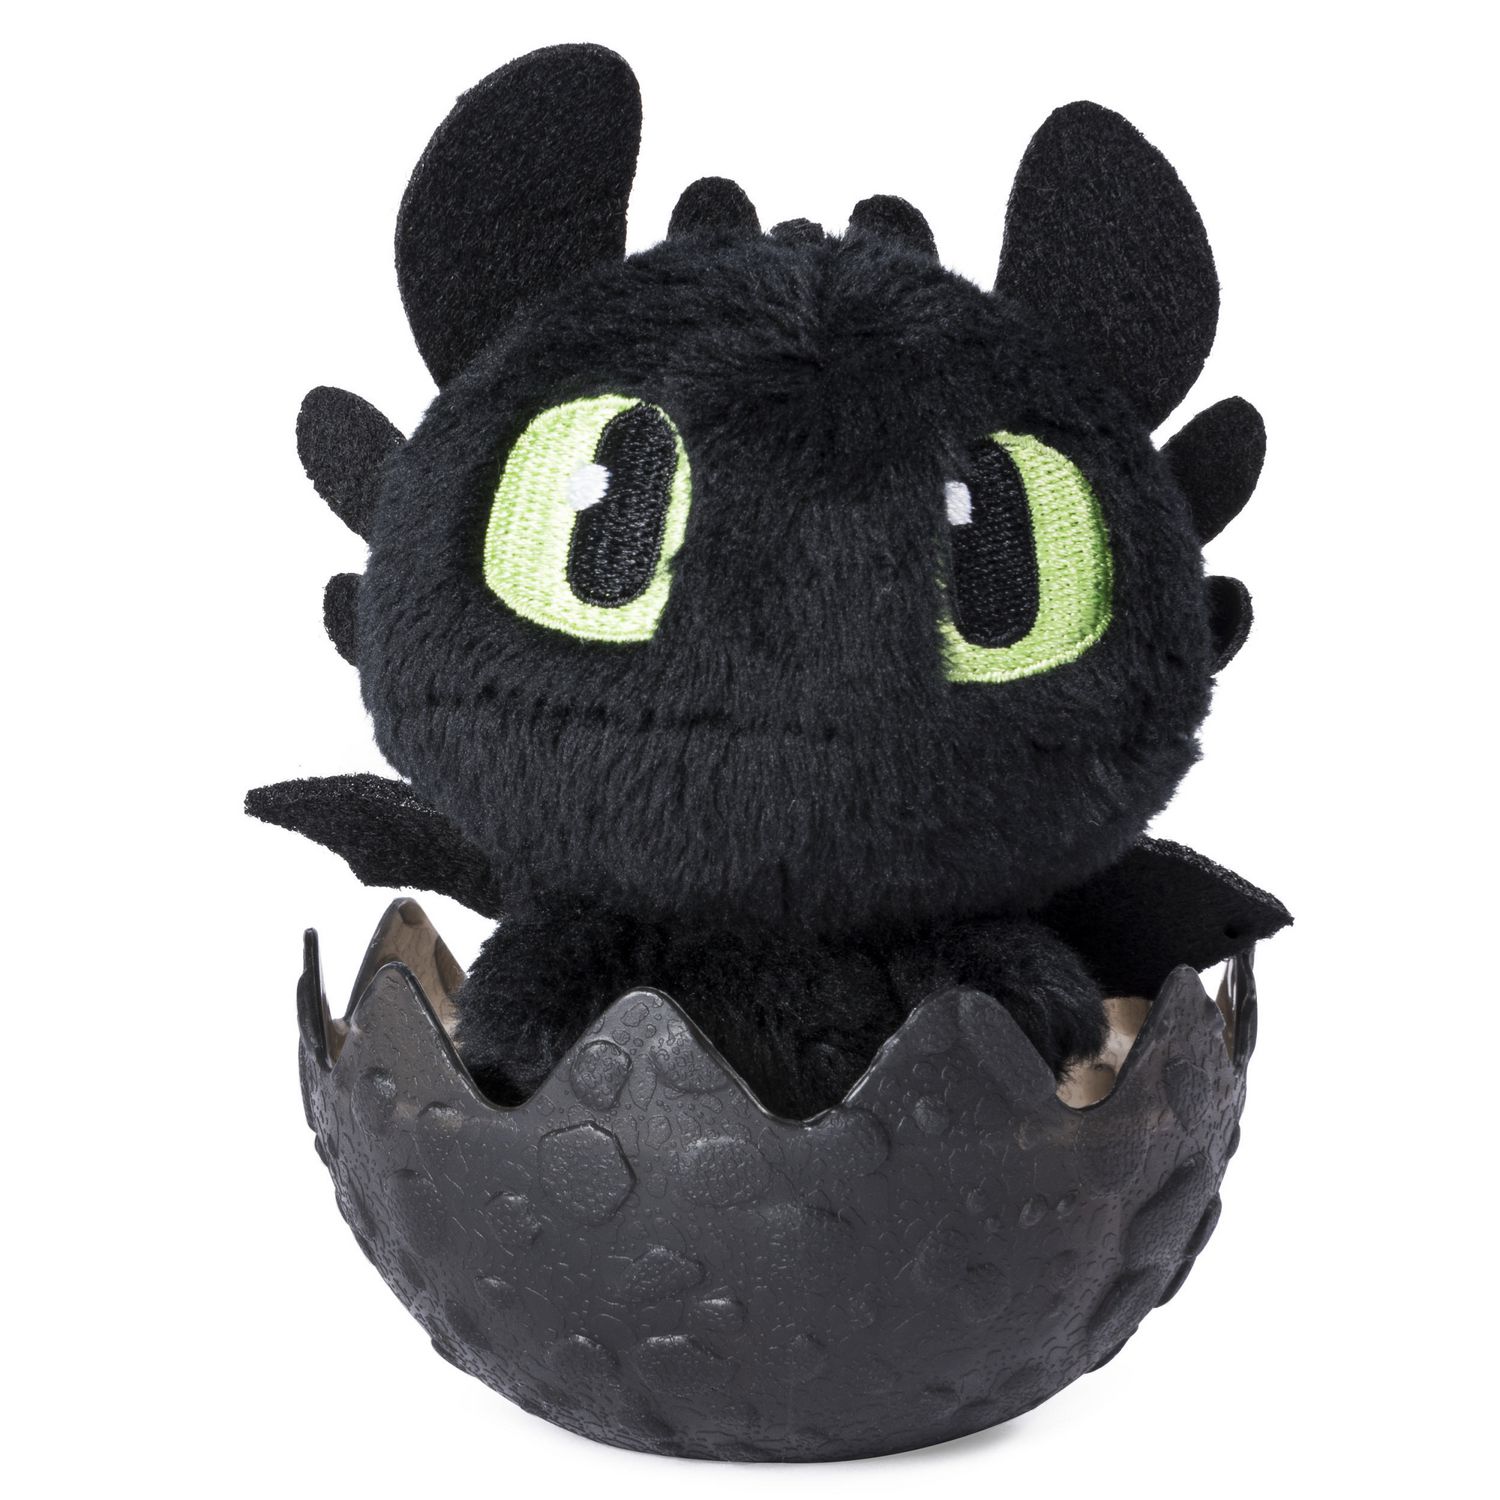 How To Train Your Dragon The Hidden World Baby Toothless Dragon 3" Plush in Egg 